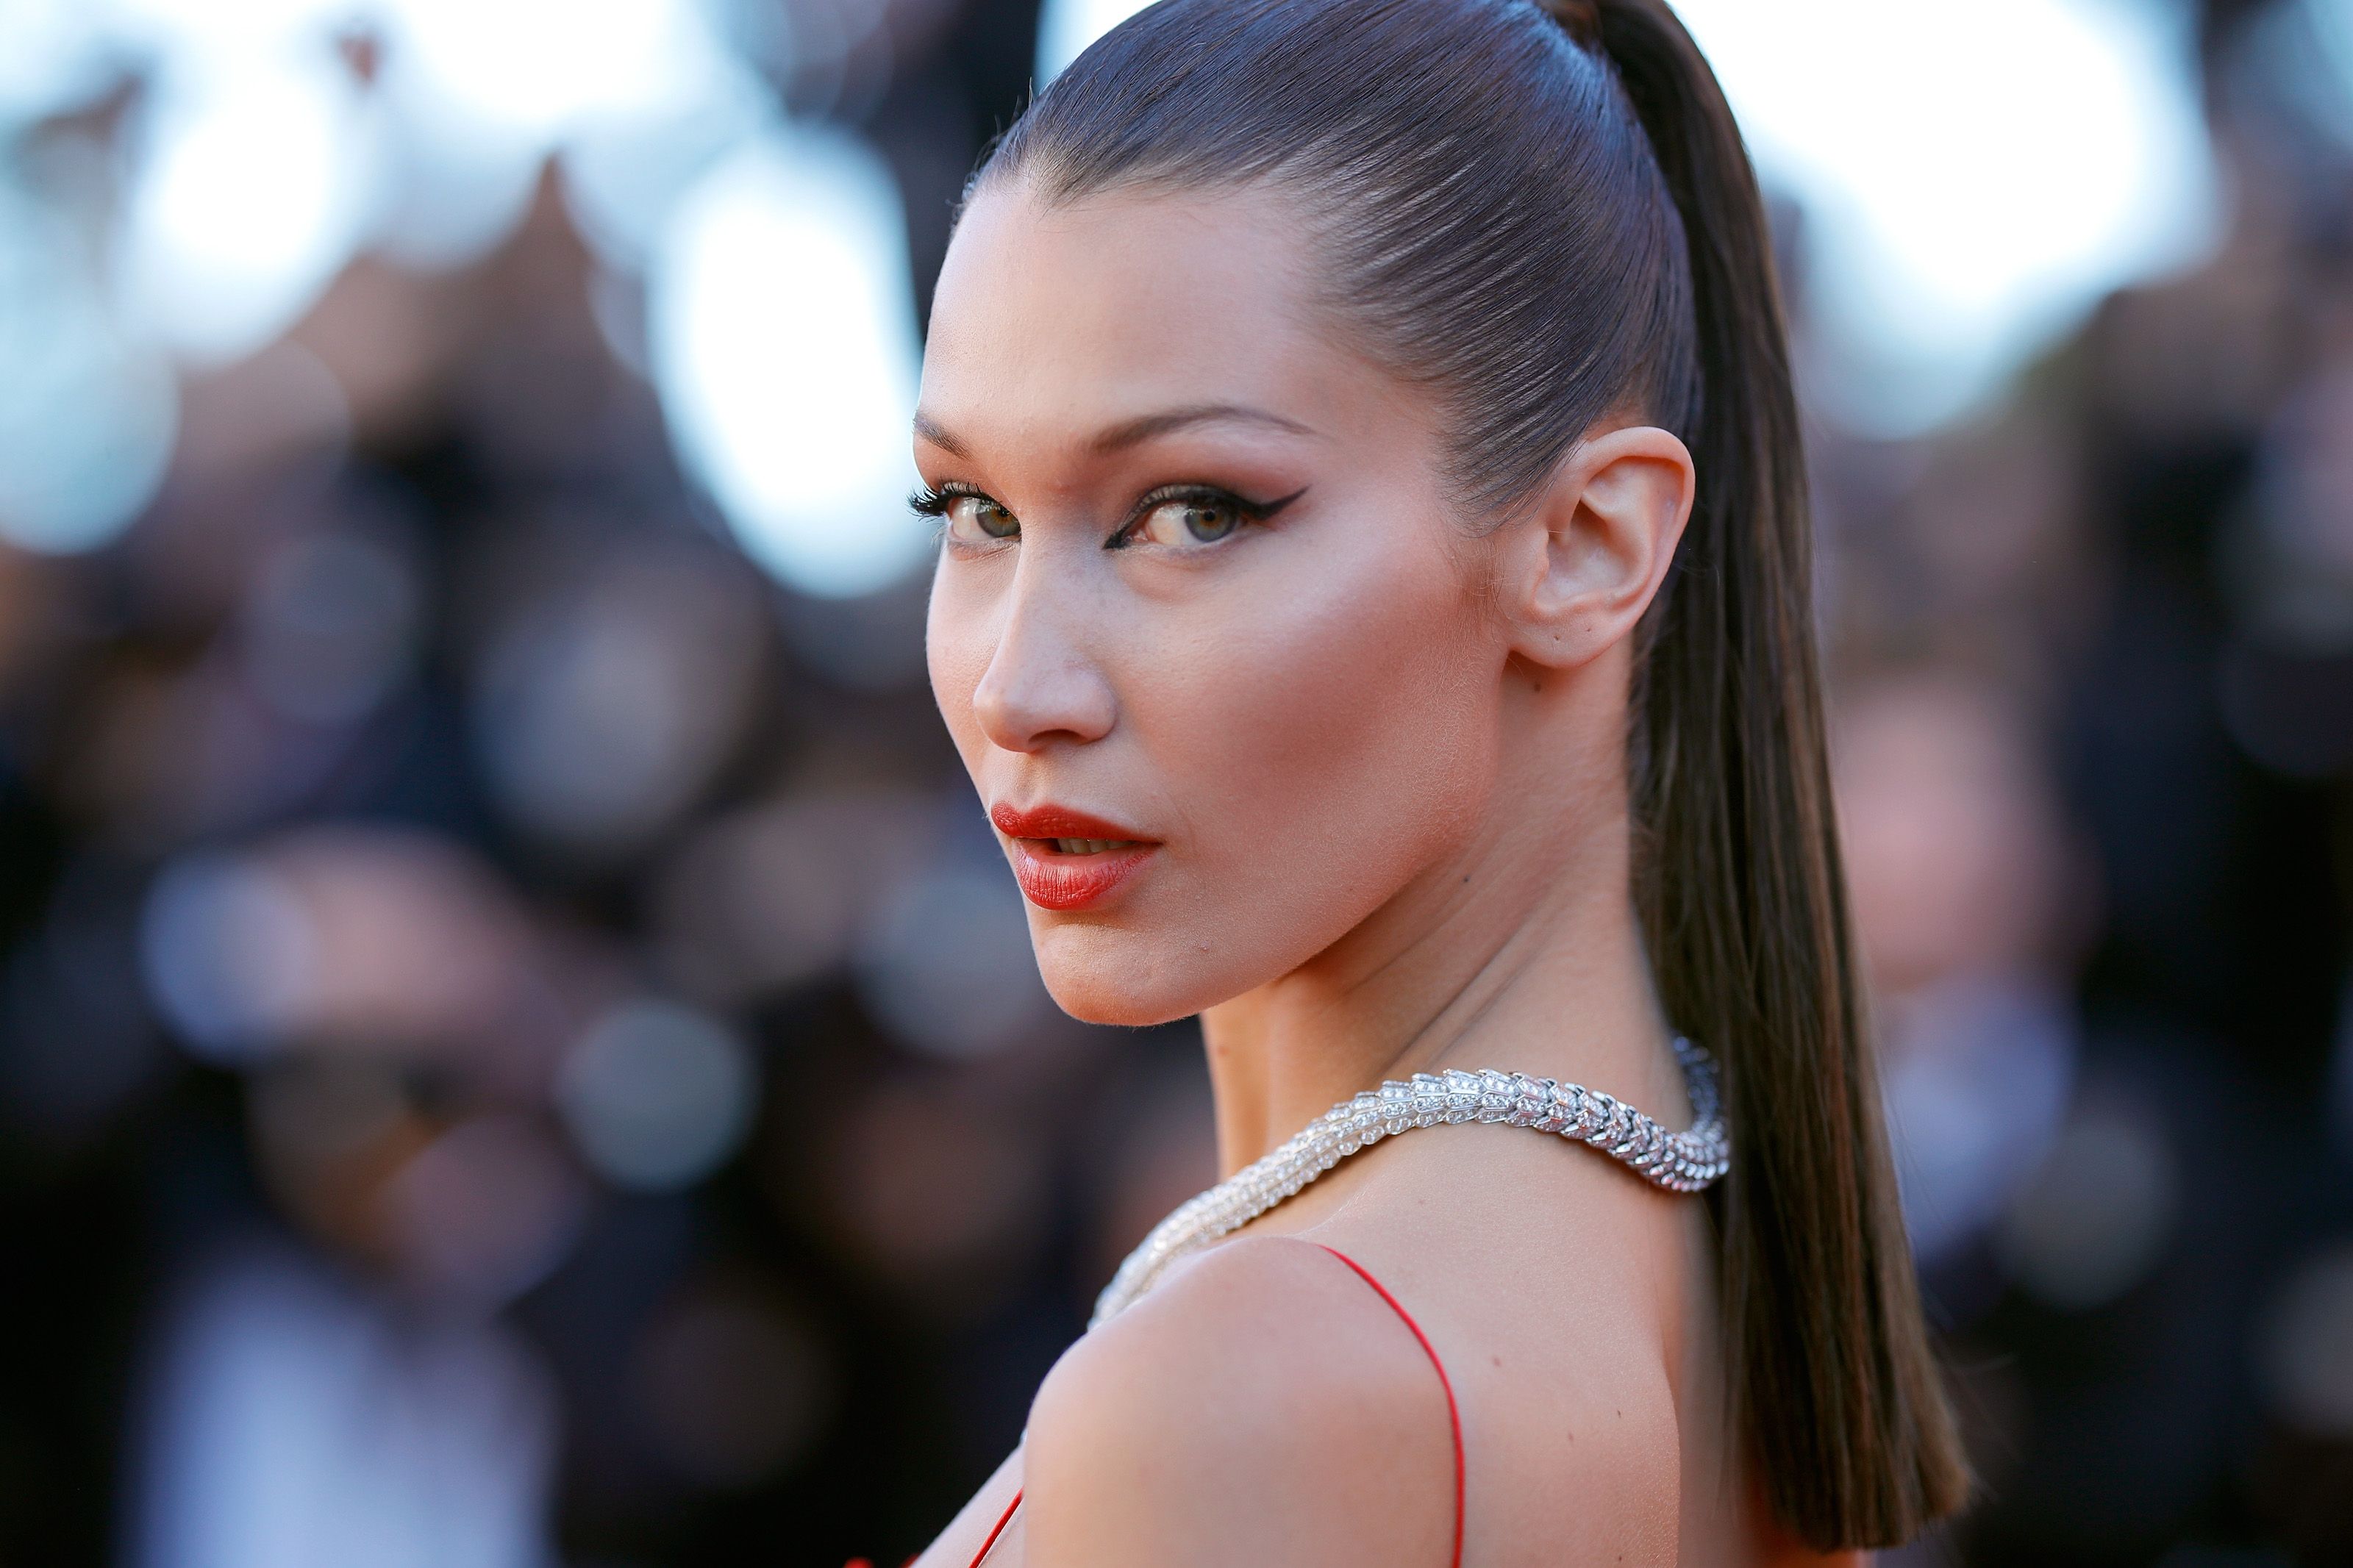 Bella Hadid's pictures in YOGA POSES are goals